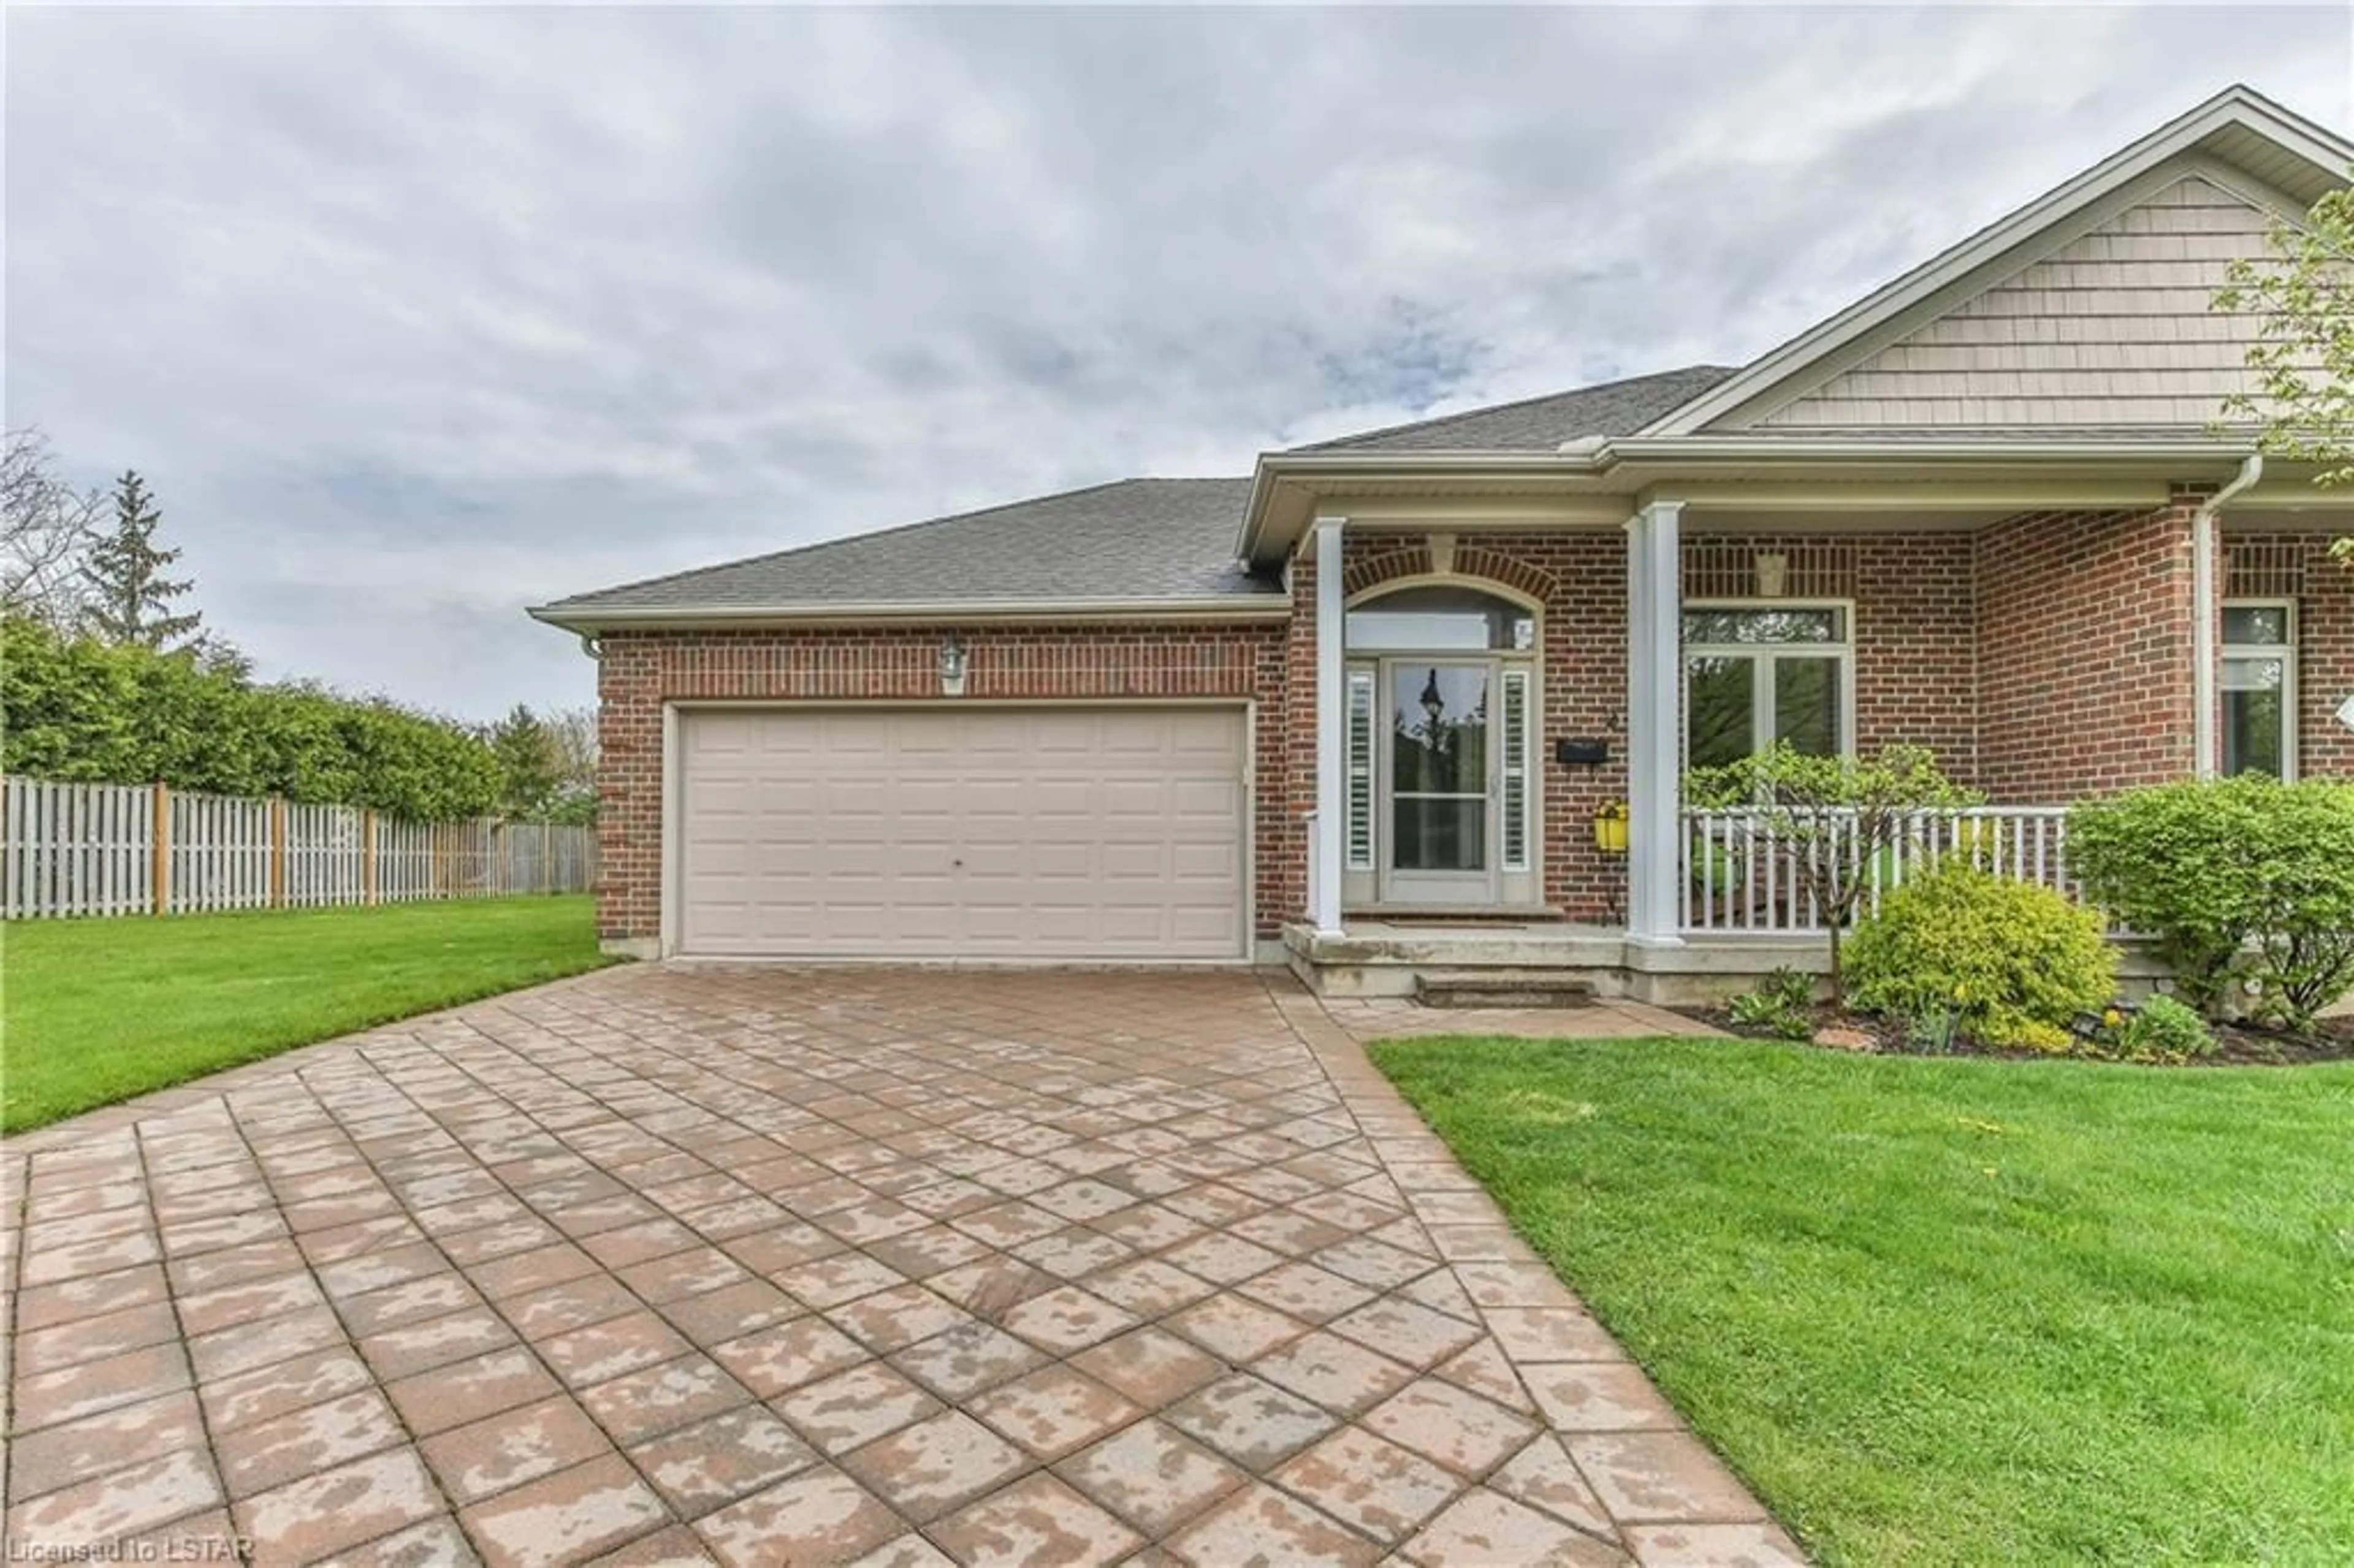 Home with brick exterior material for 886 Cranbrook Rd #2, London Ontario N6K 4Y8